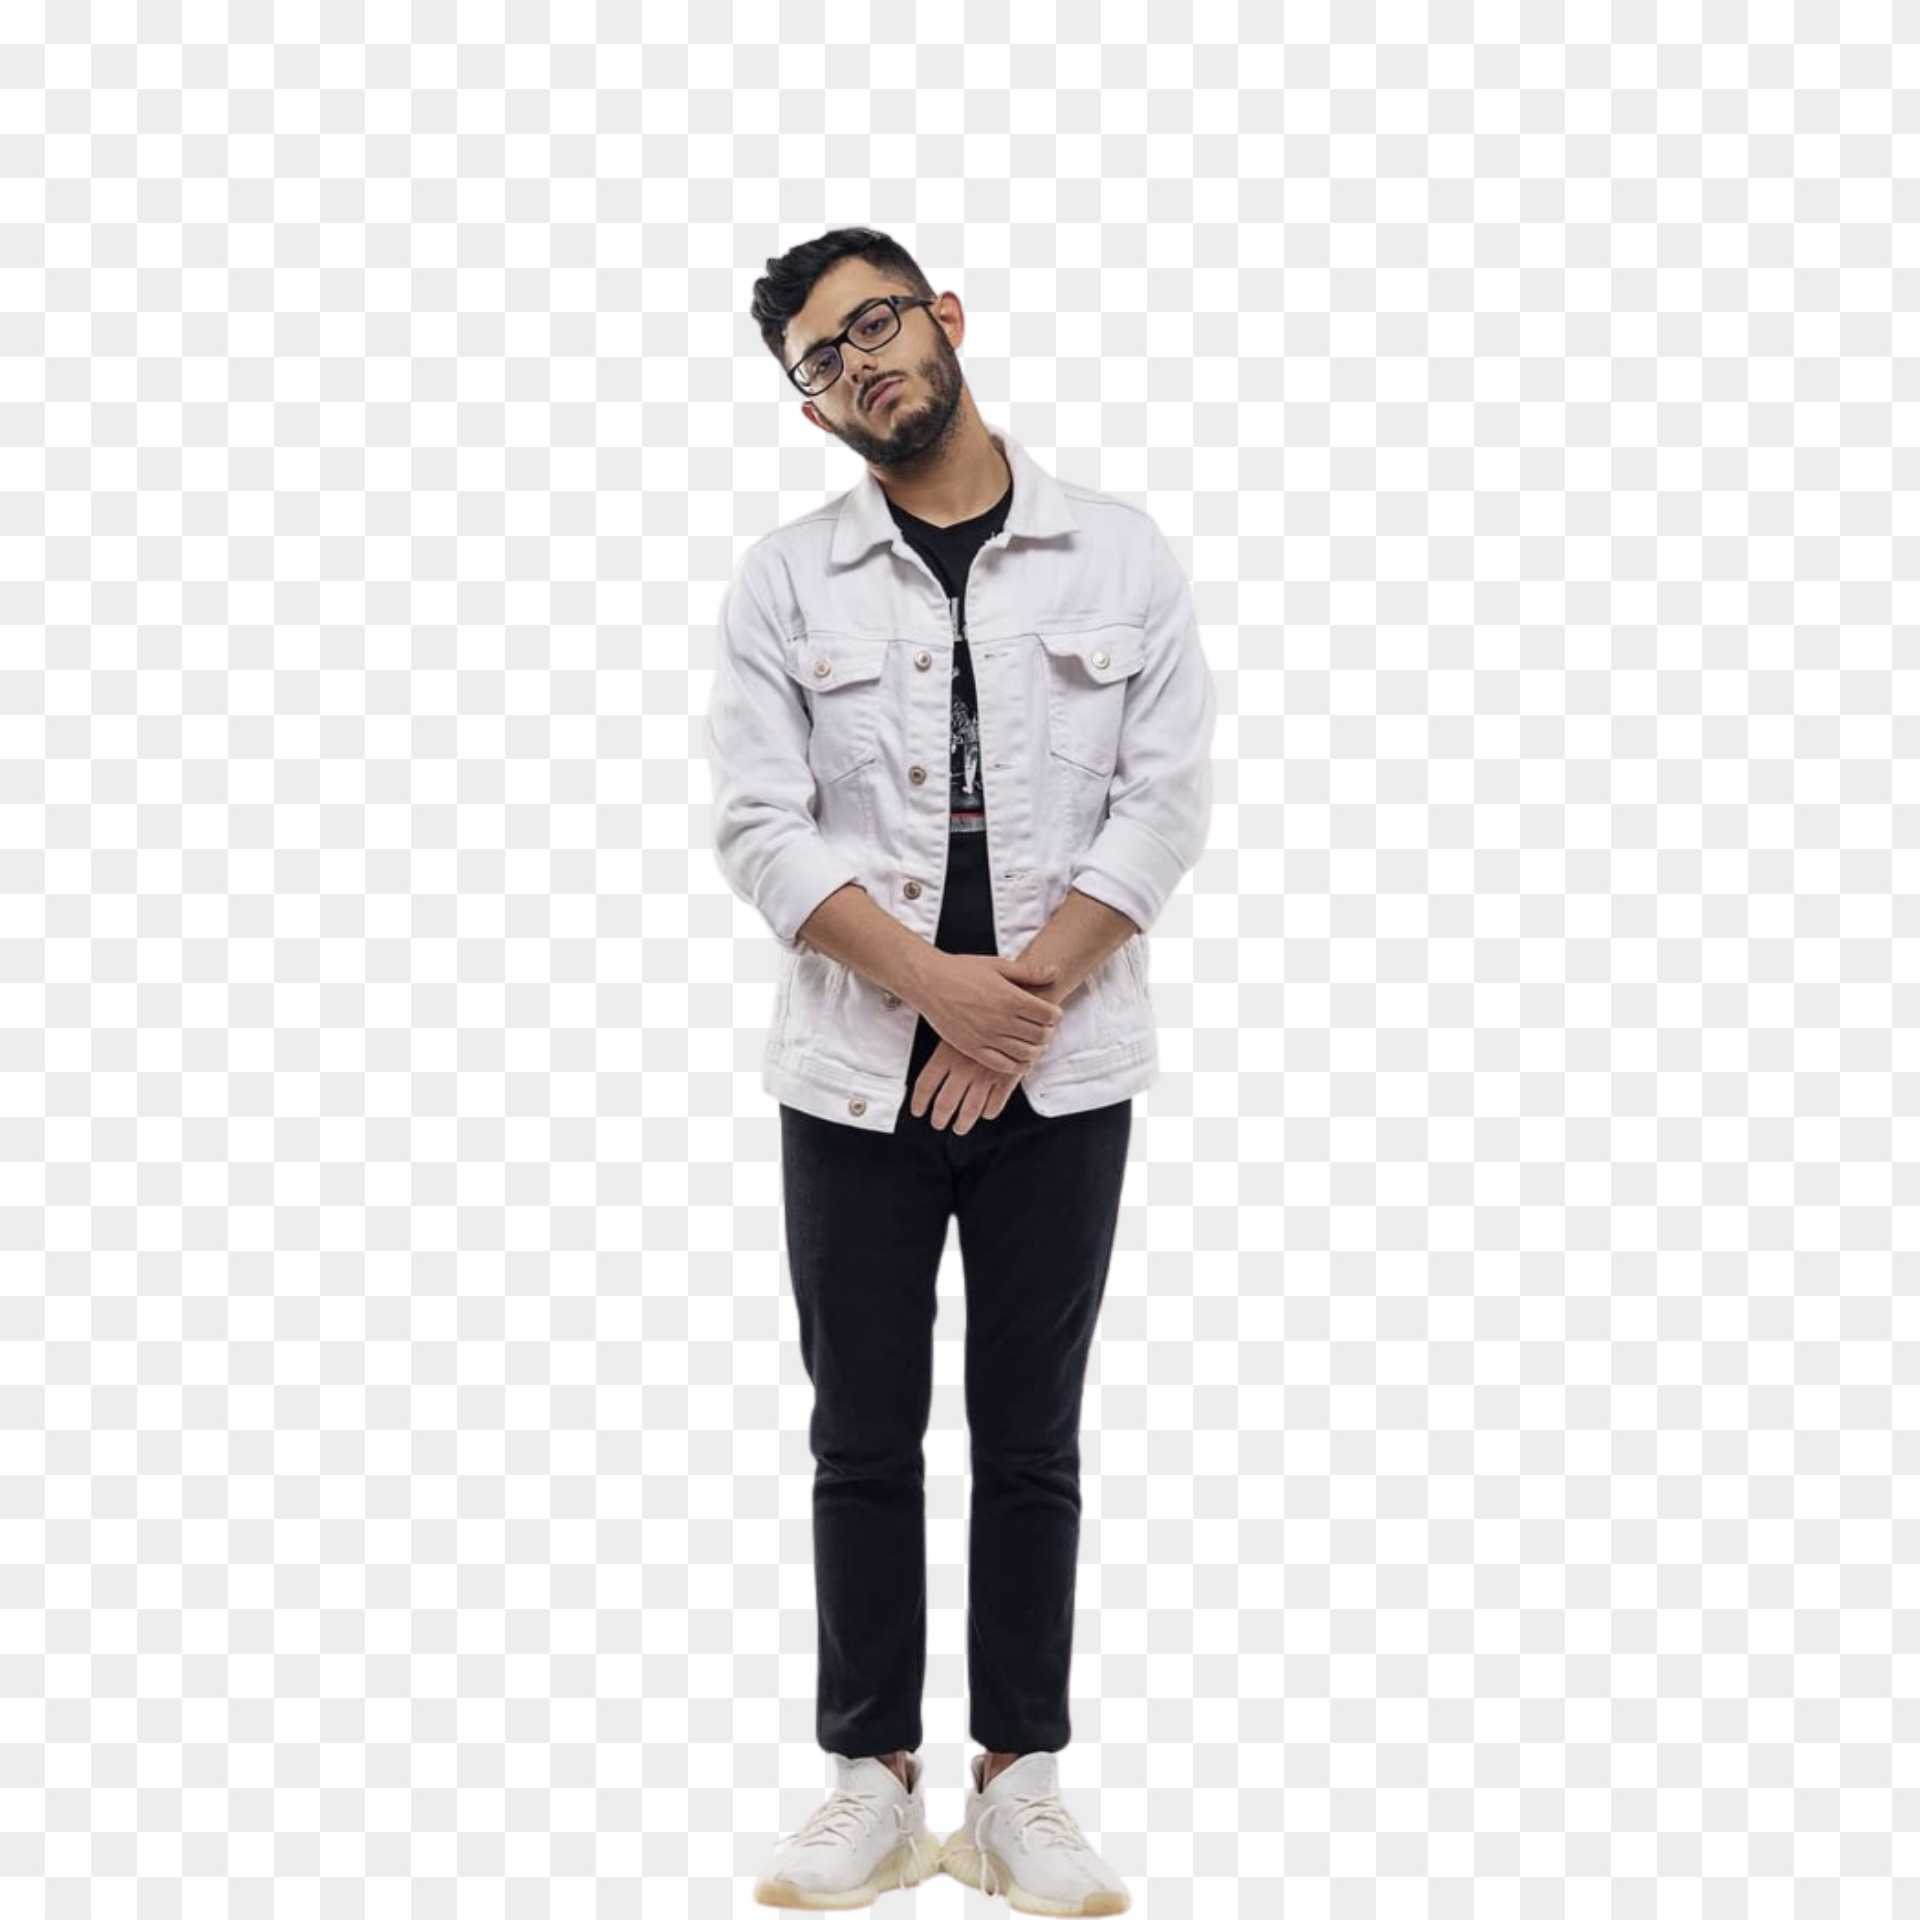 Carryminati standing png image